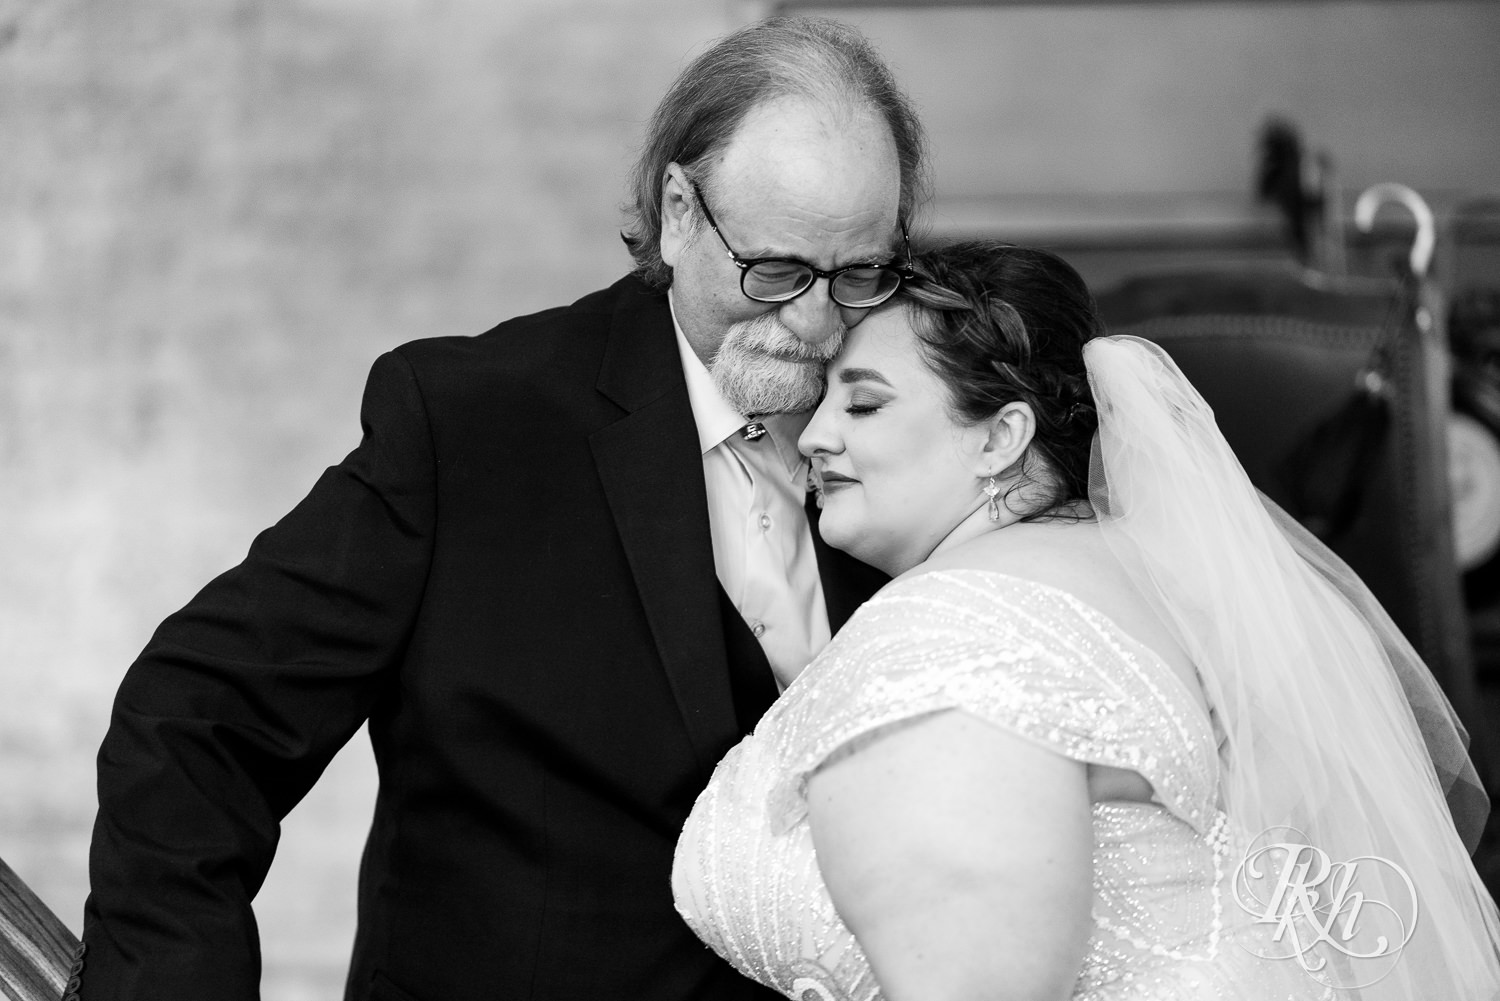 Plus size bride doing first look with dad at Kellerman's Event Center in White Bear Lake, Minnesota.